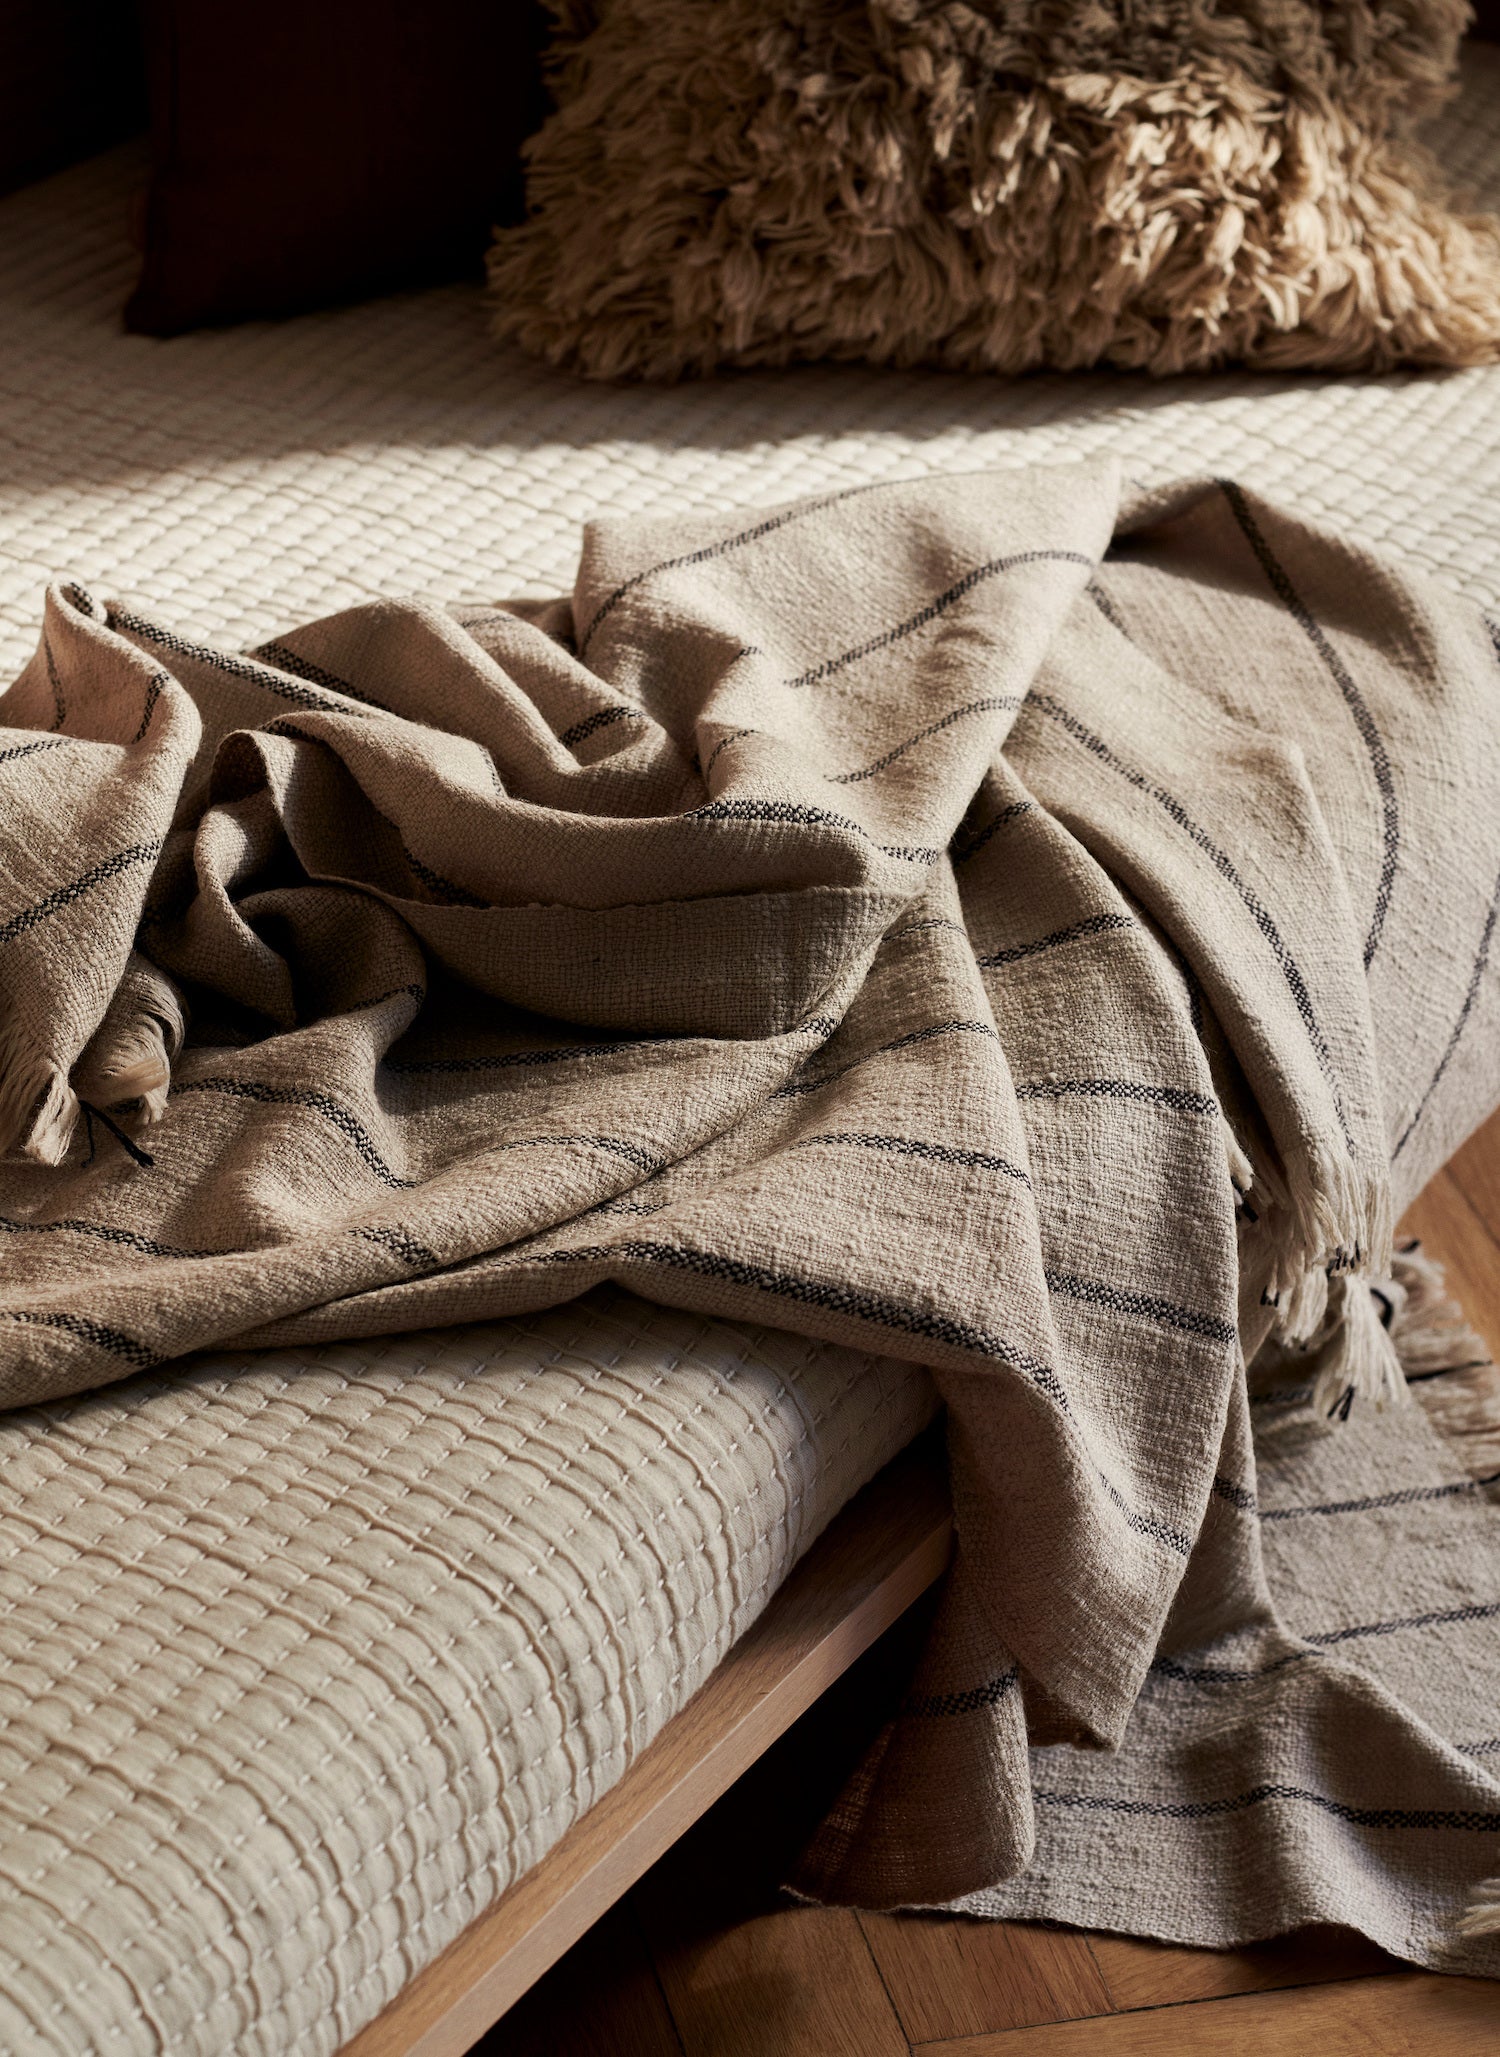 Calm Blanket. Like its name suggests, the Calm Blanket adds a feeling of tranquility to your space thanks to its muted hues and soothing lines. 